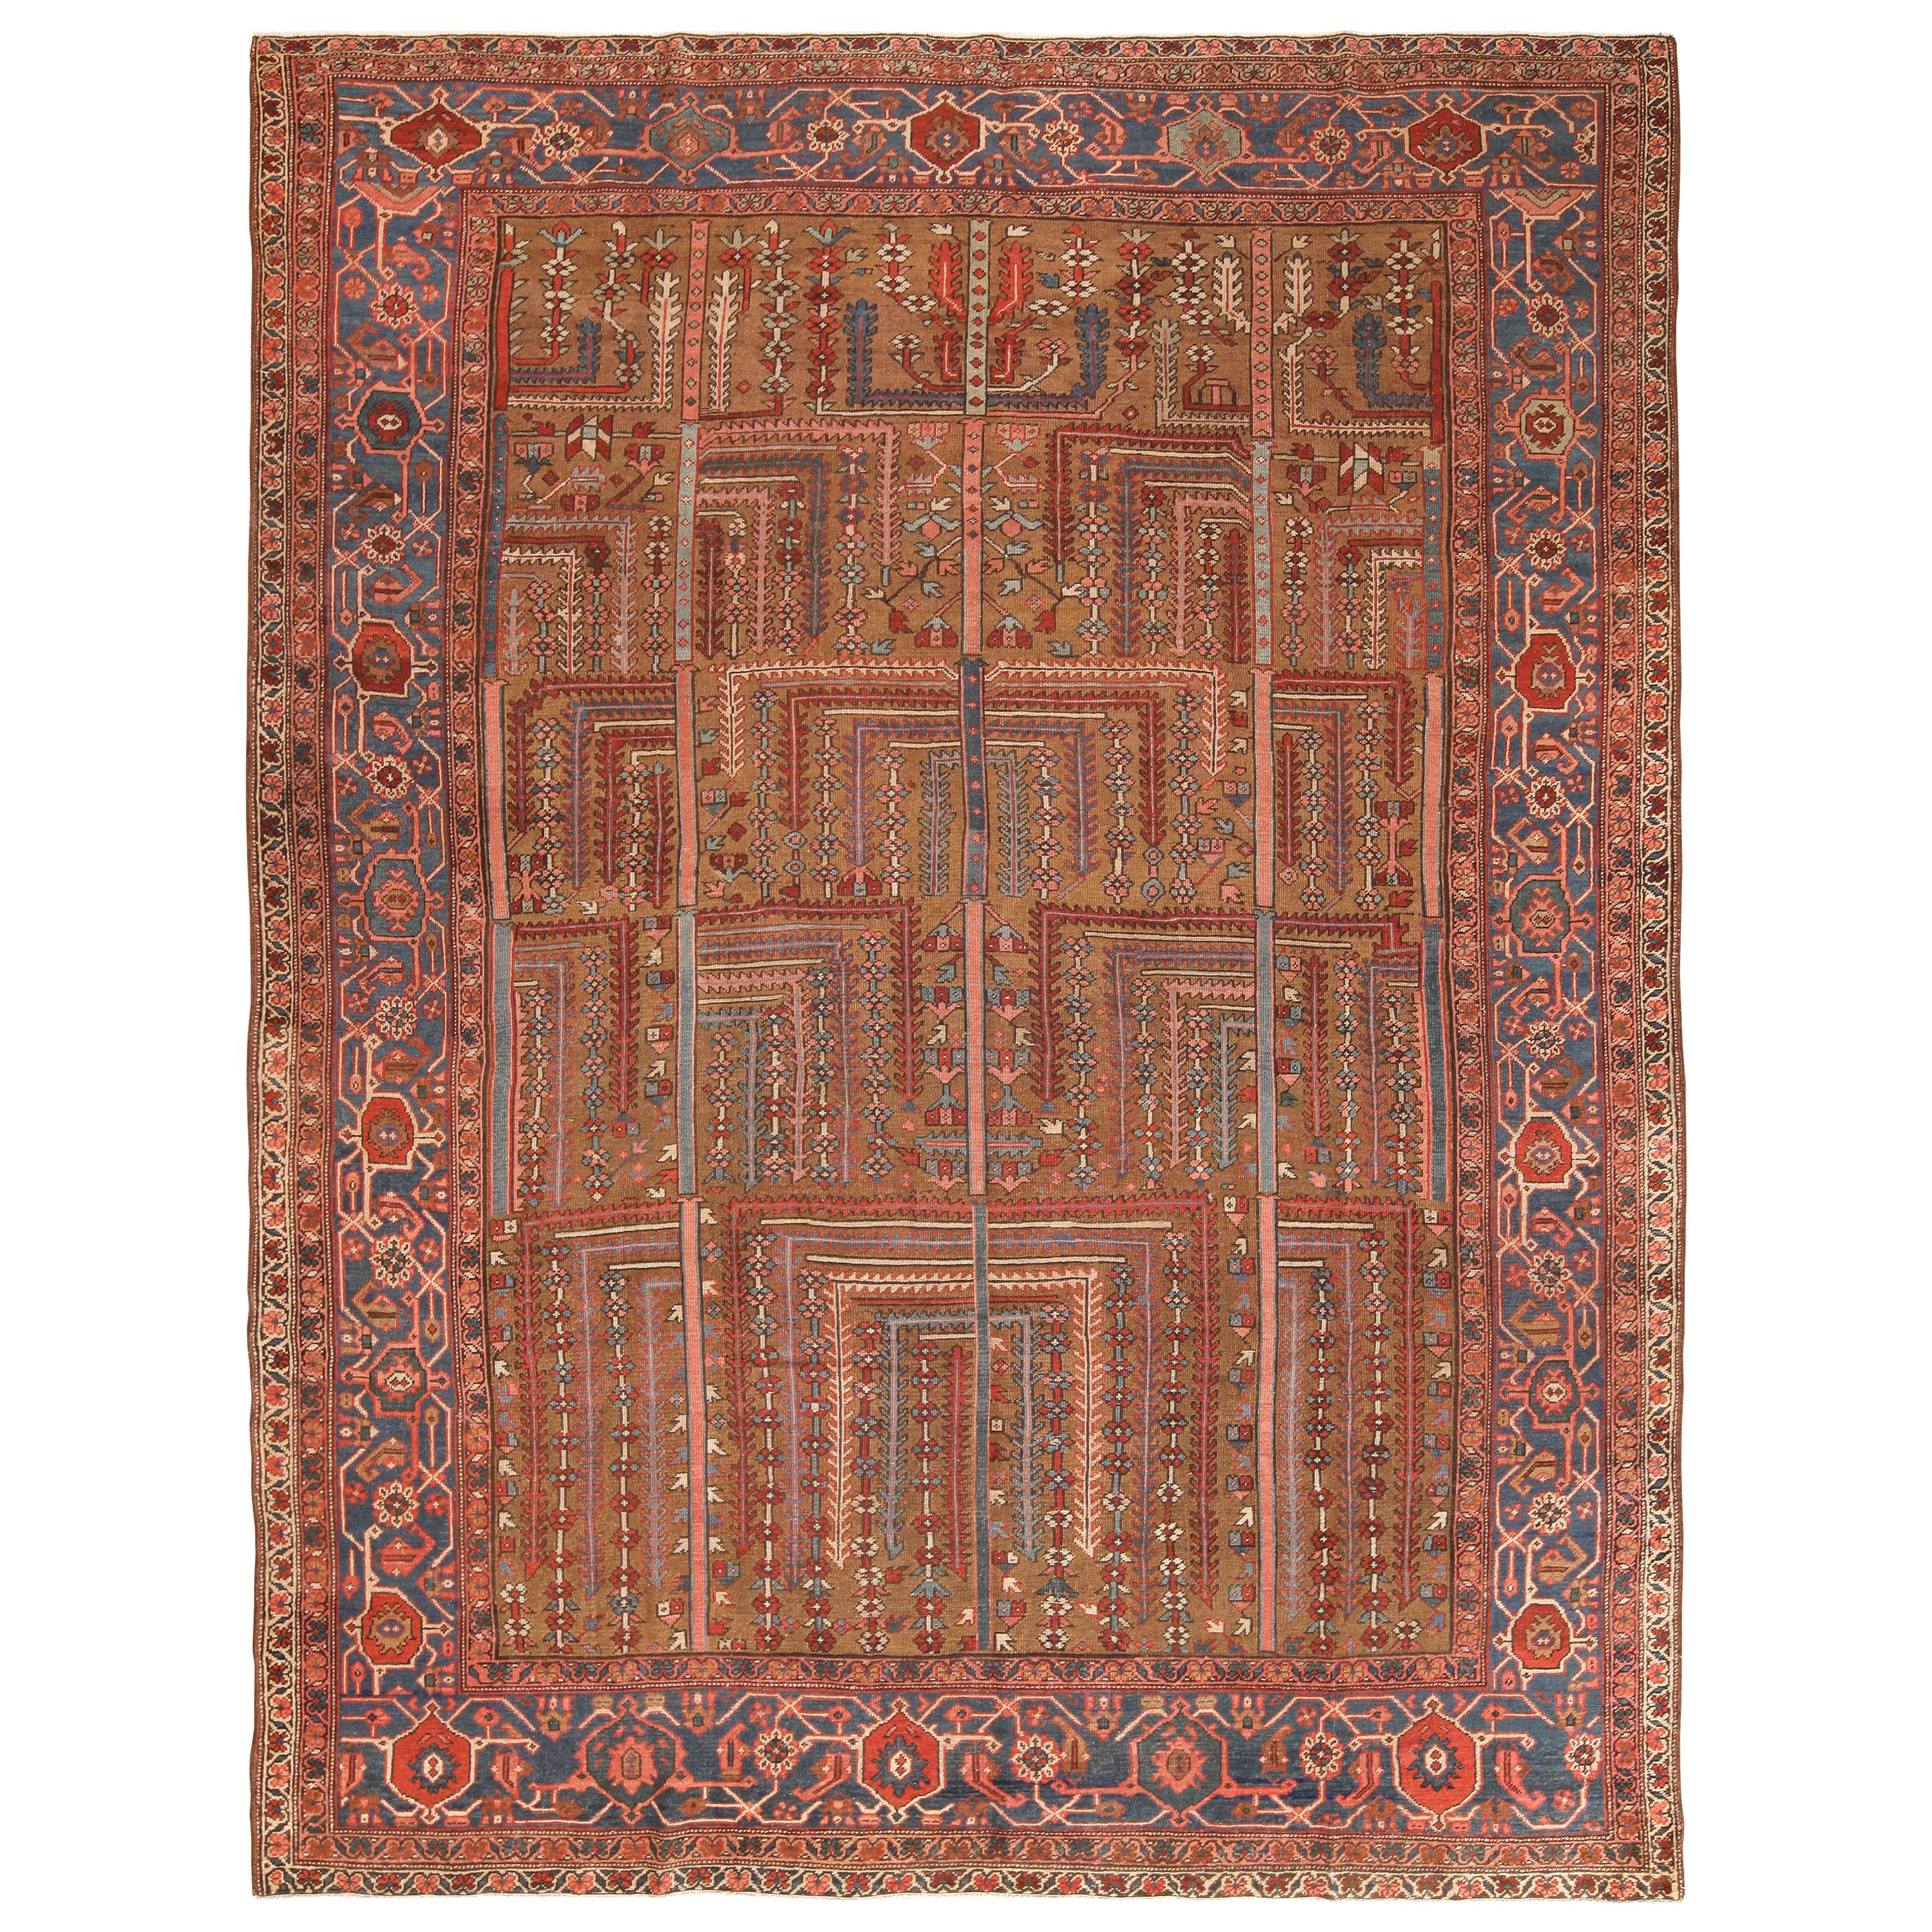 Nazmiyal Collection Antique Persian Bakshaish Rug. 9 ft 1 in x 12 ft